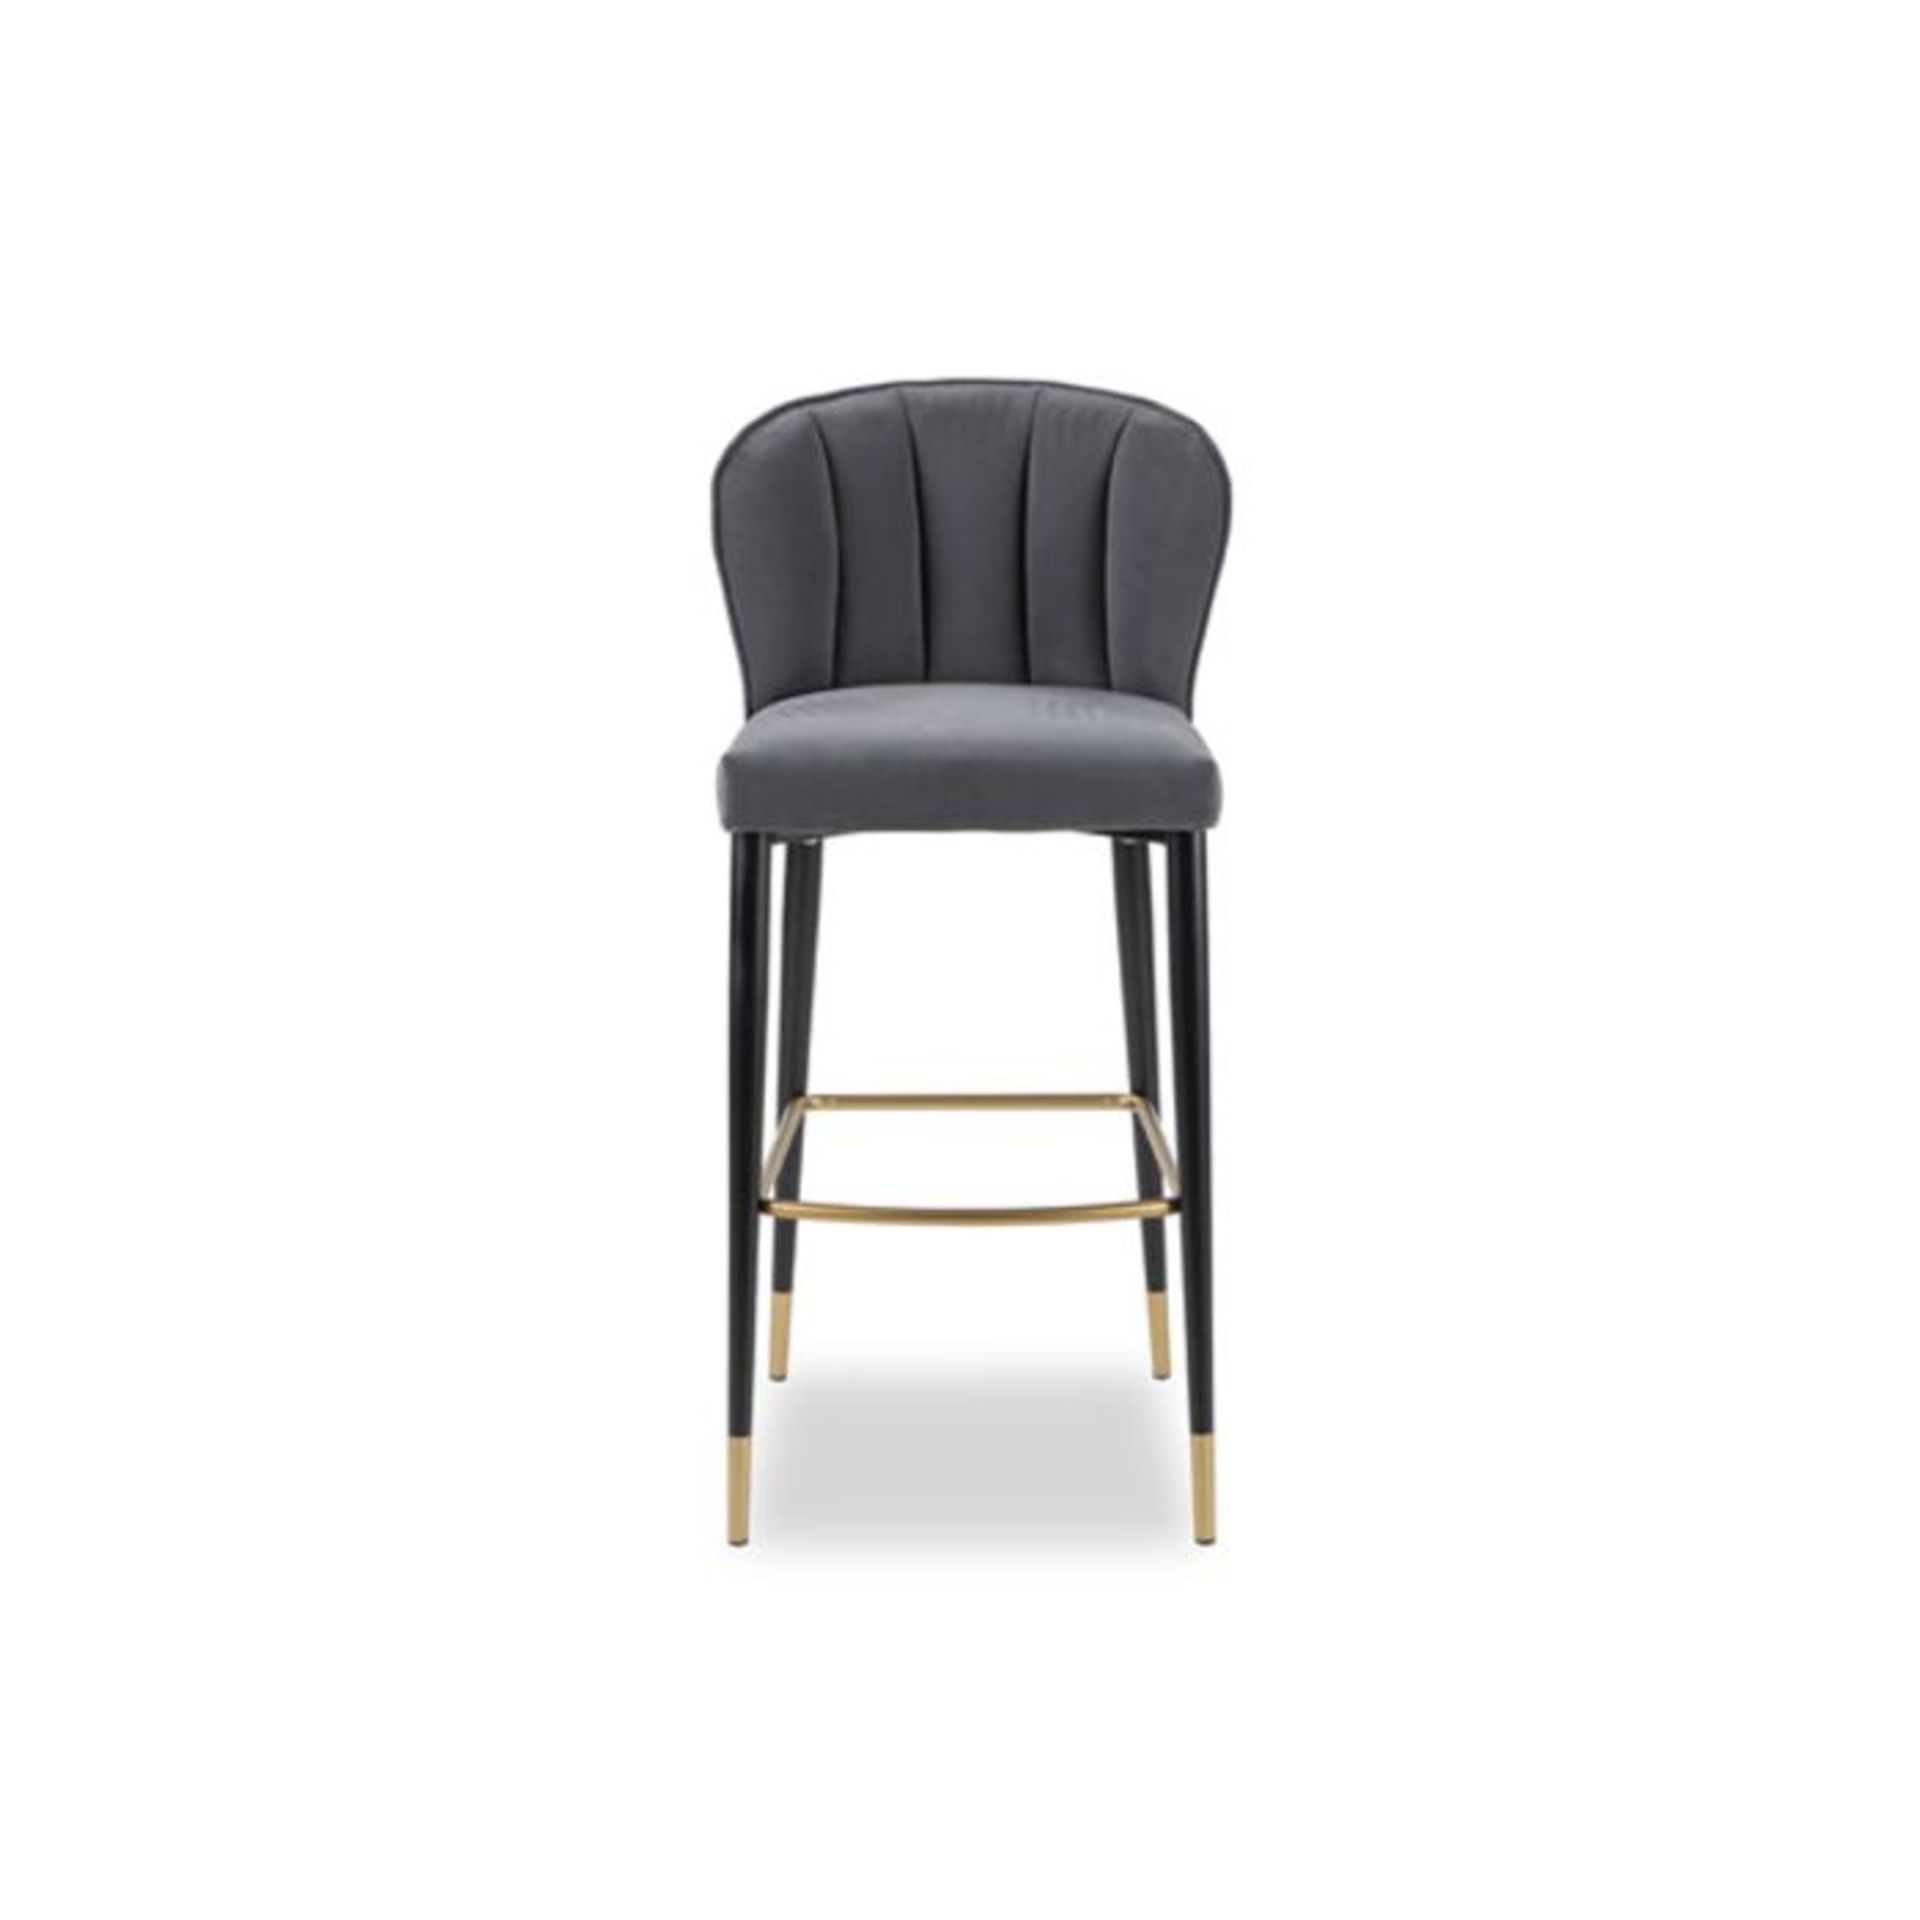 Toscana Latte Ancor, Matt Black Steel Legs with Gold finish Feet & Footrest Ensure comfort in your - Image 2 of 3